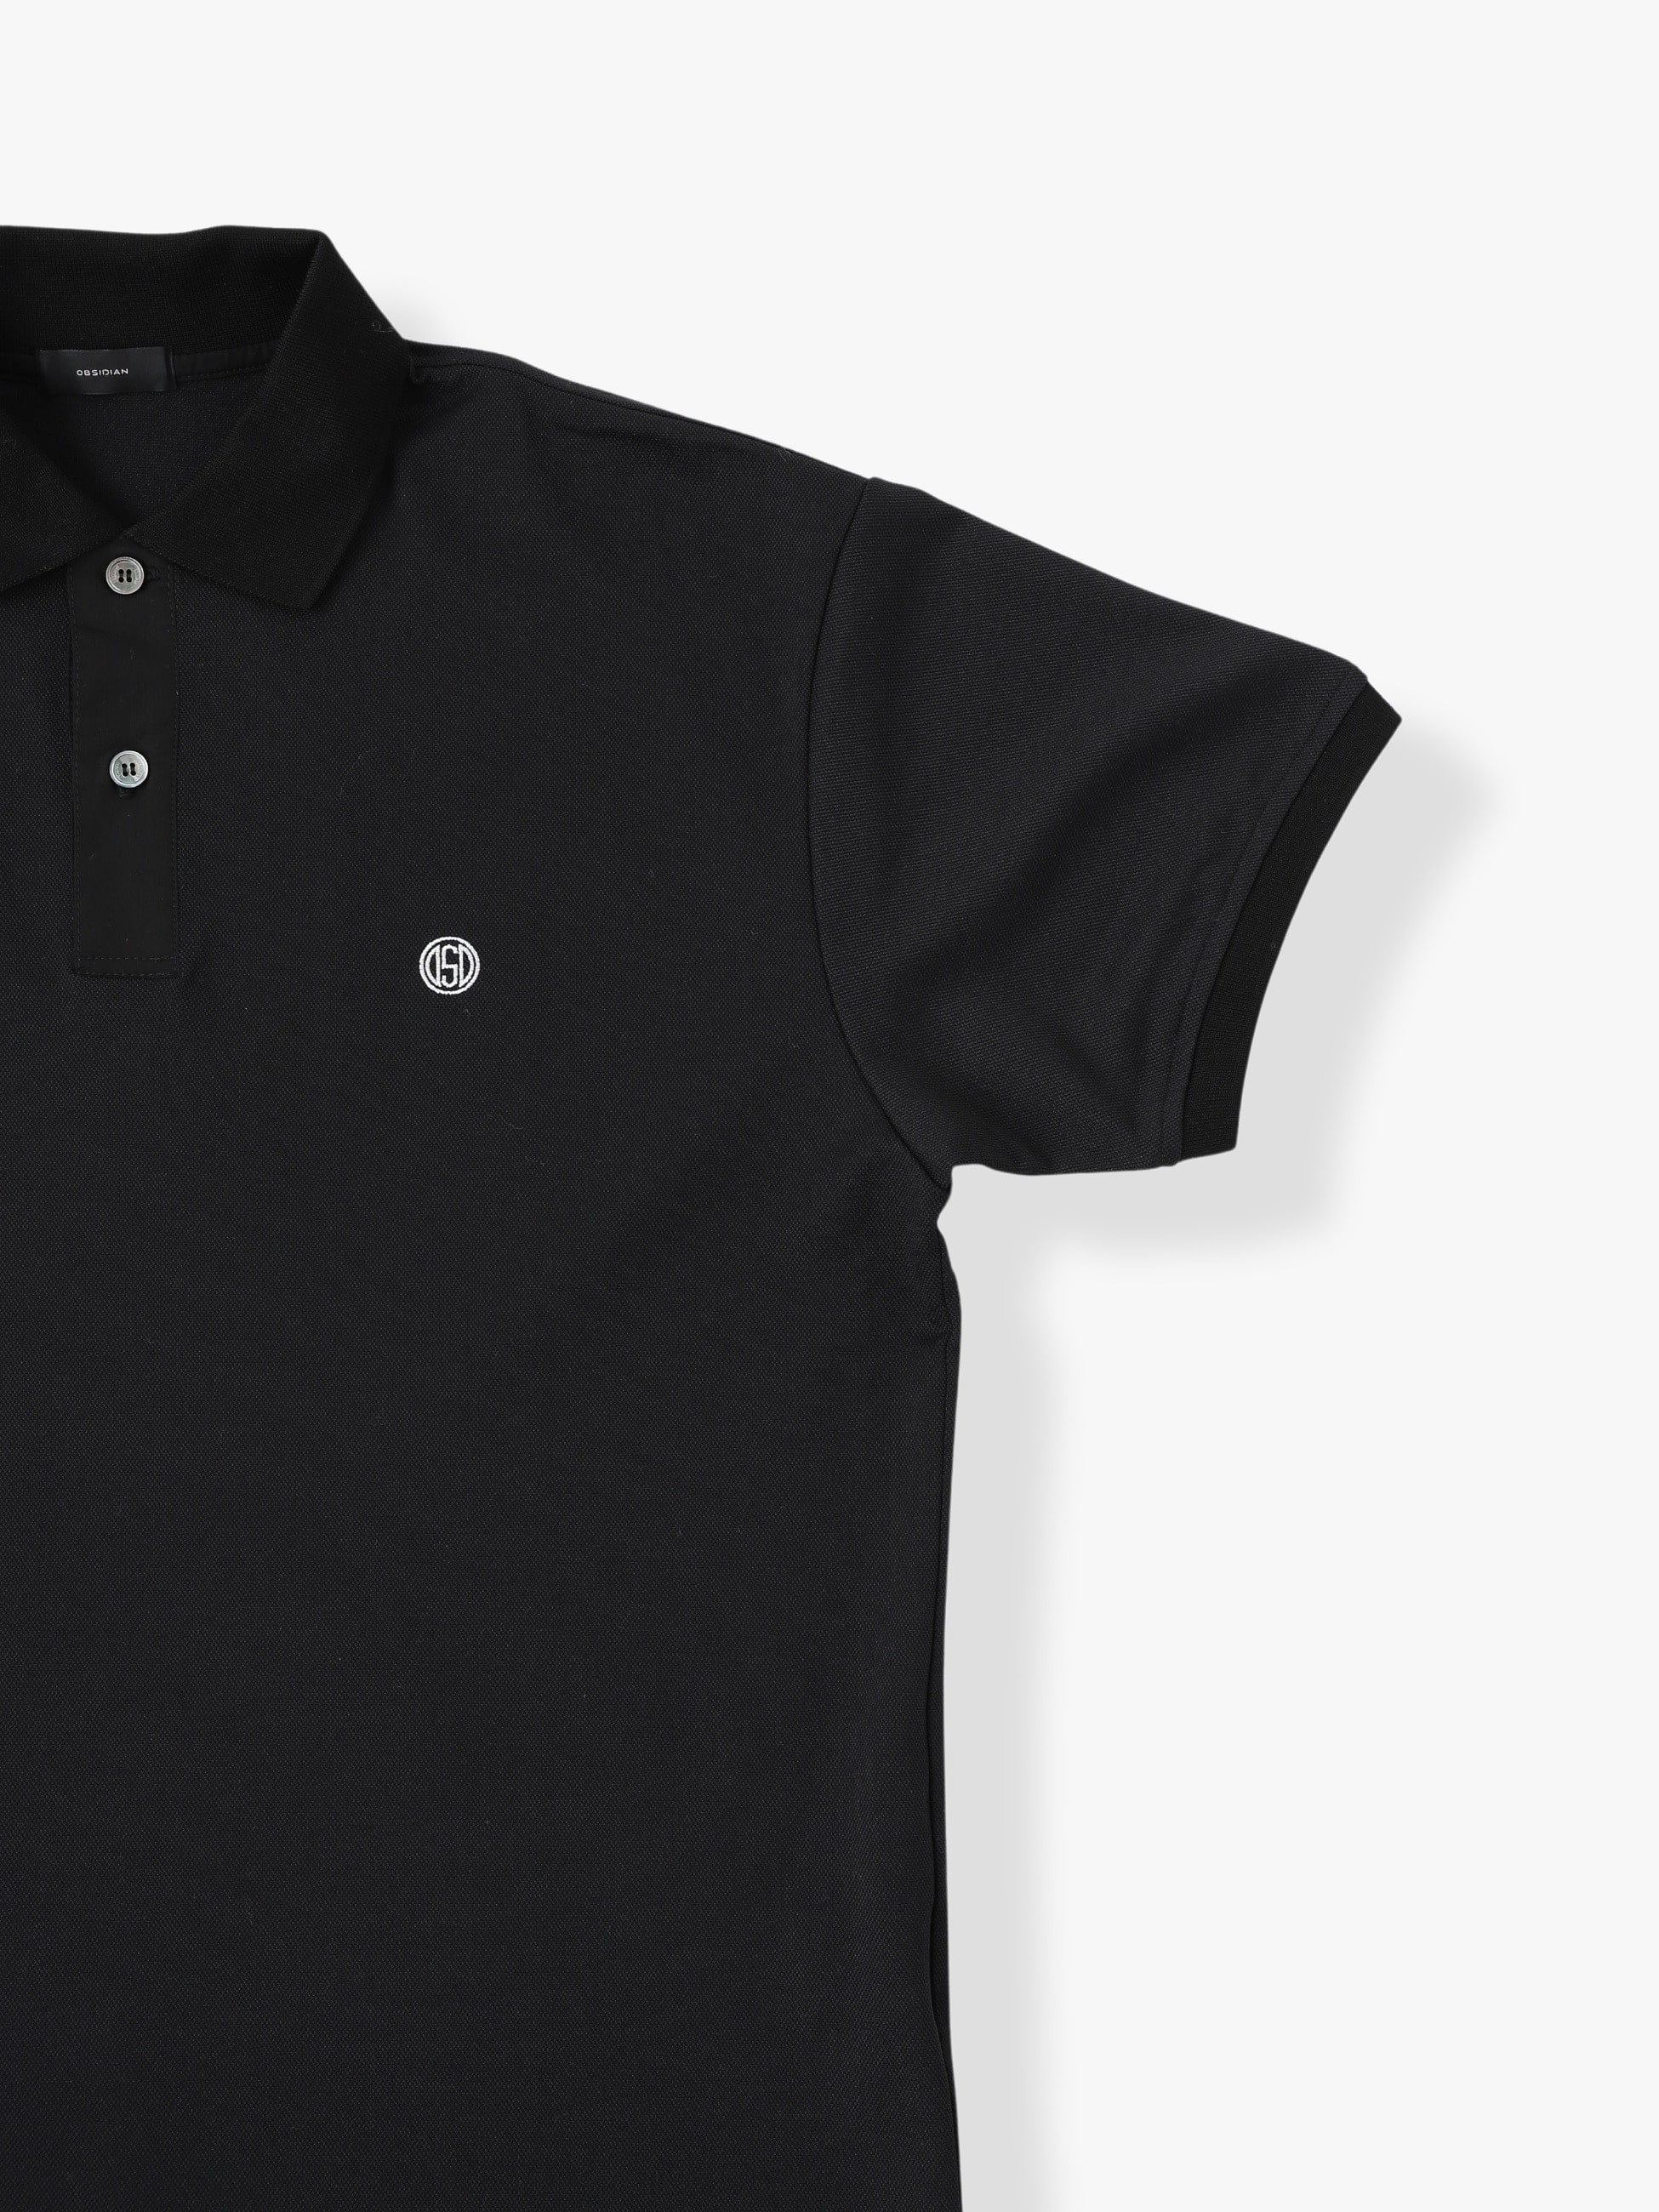 Reguler Fit Polo Shirt 詳細画像 other 2